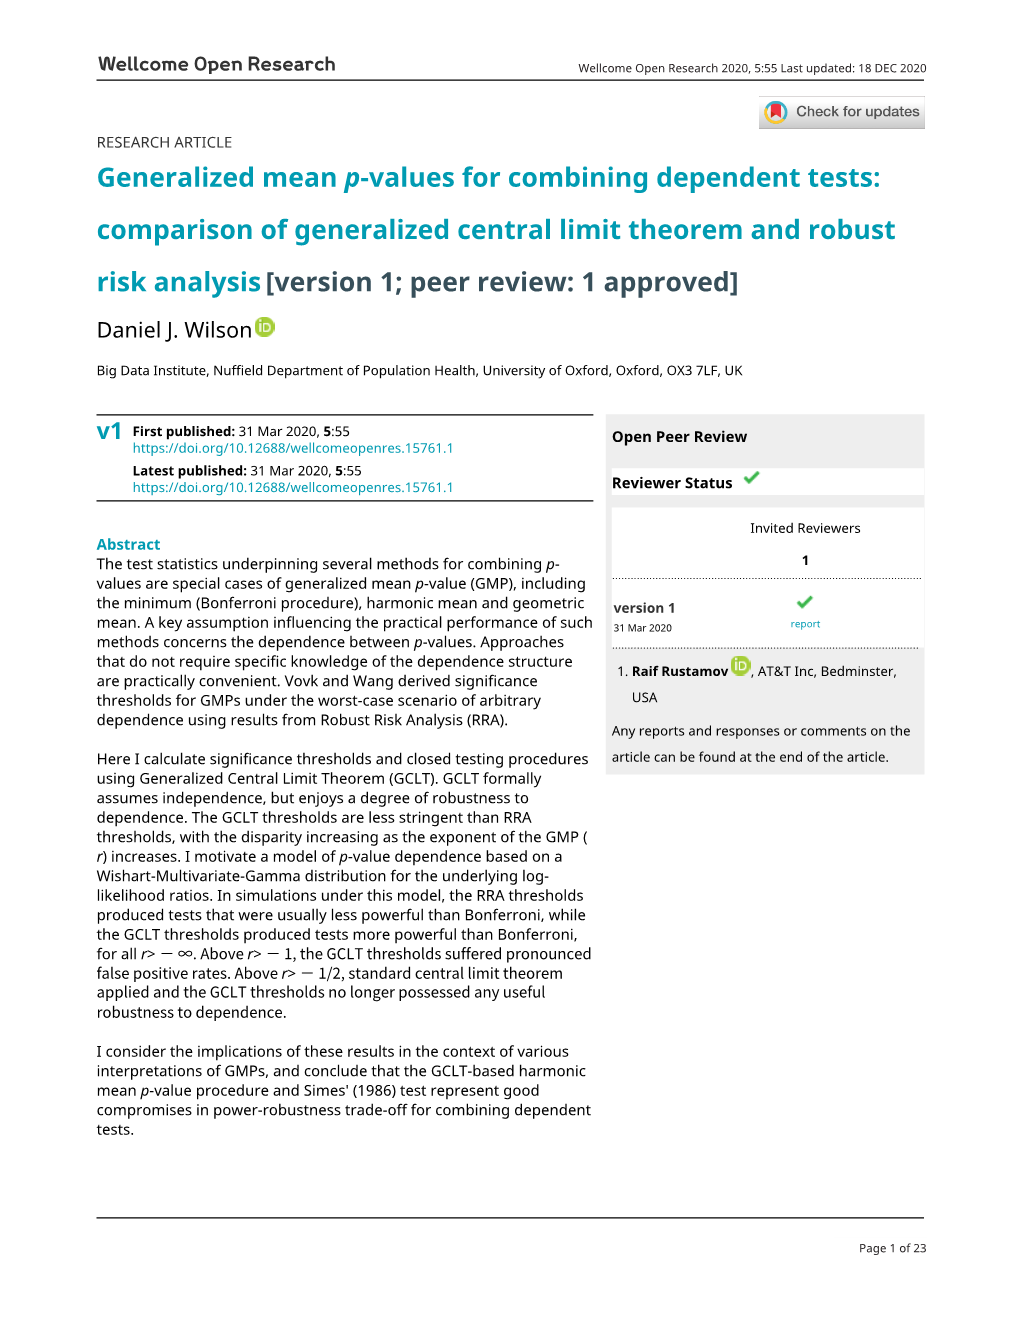 Generalized Mean P-Values for Combining Dependent Tests: Comparison of Generalized Central Limit Theorem and Robust Risk Analysis [Version 1; Peer Review: 1 Approved]